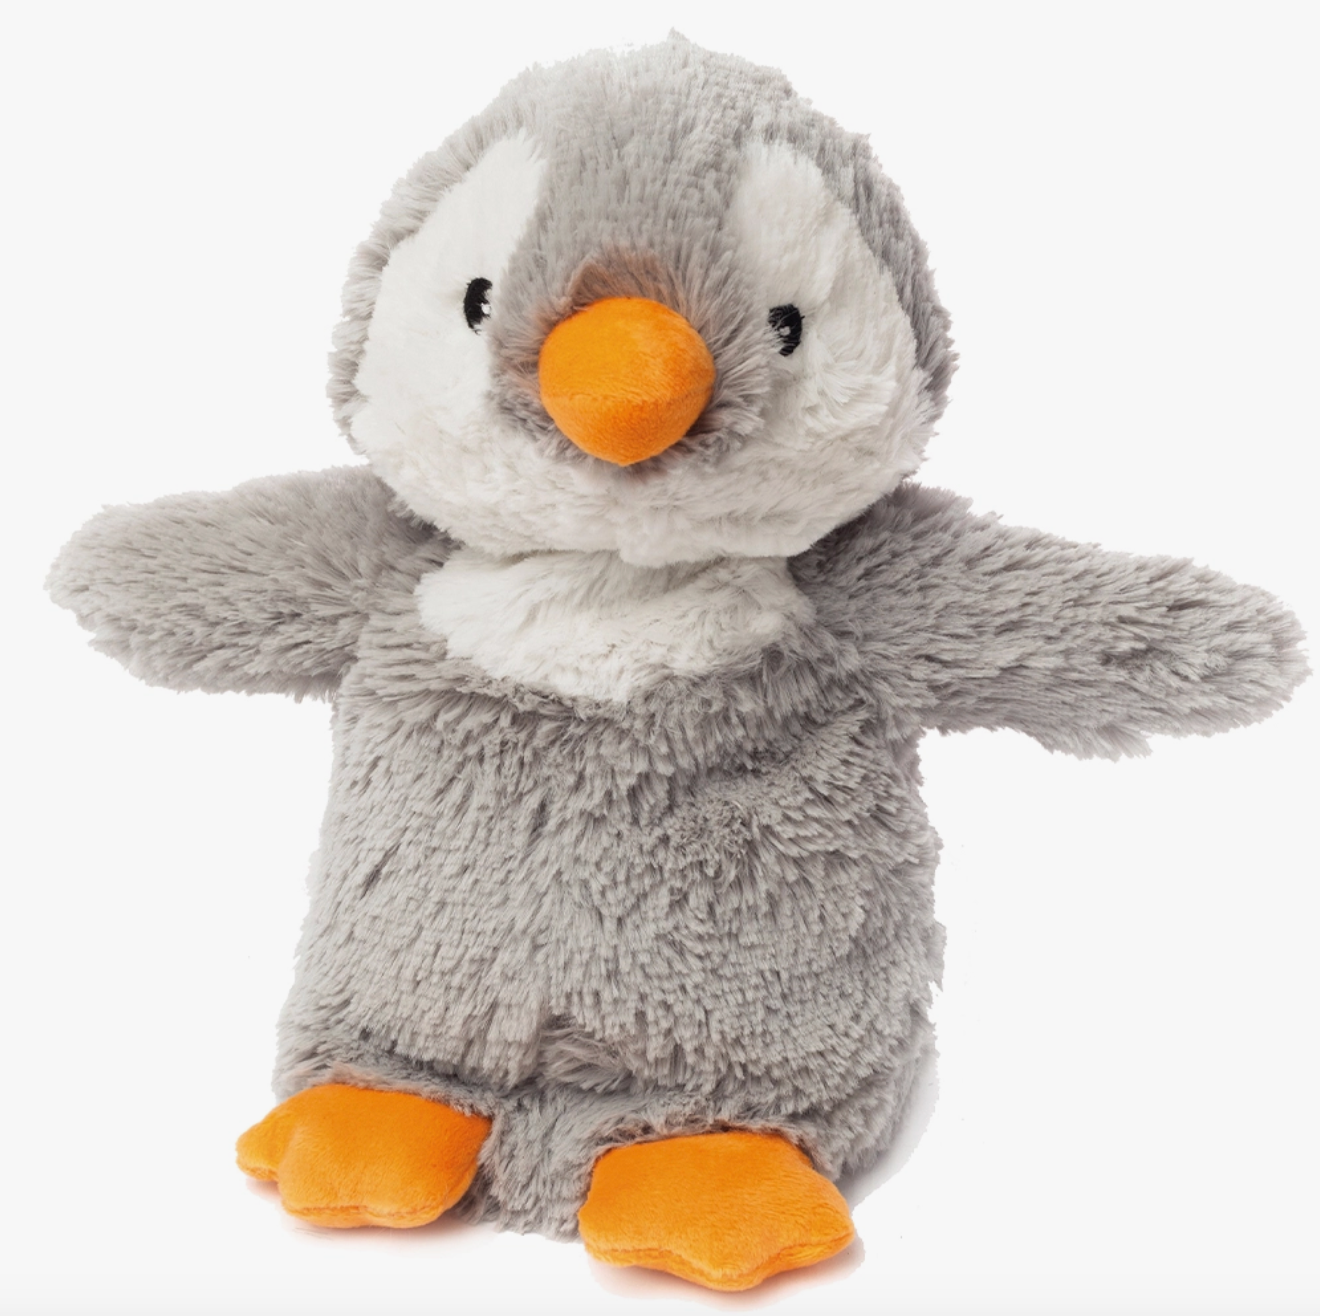 Weighted Plush Penguin Toy